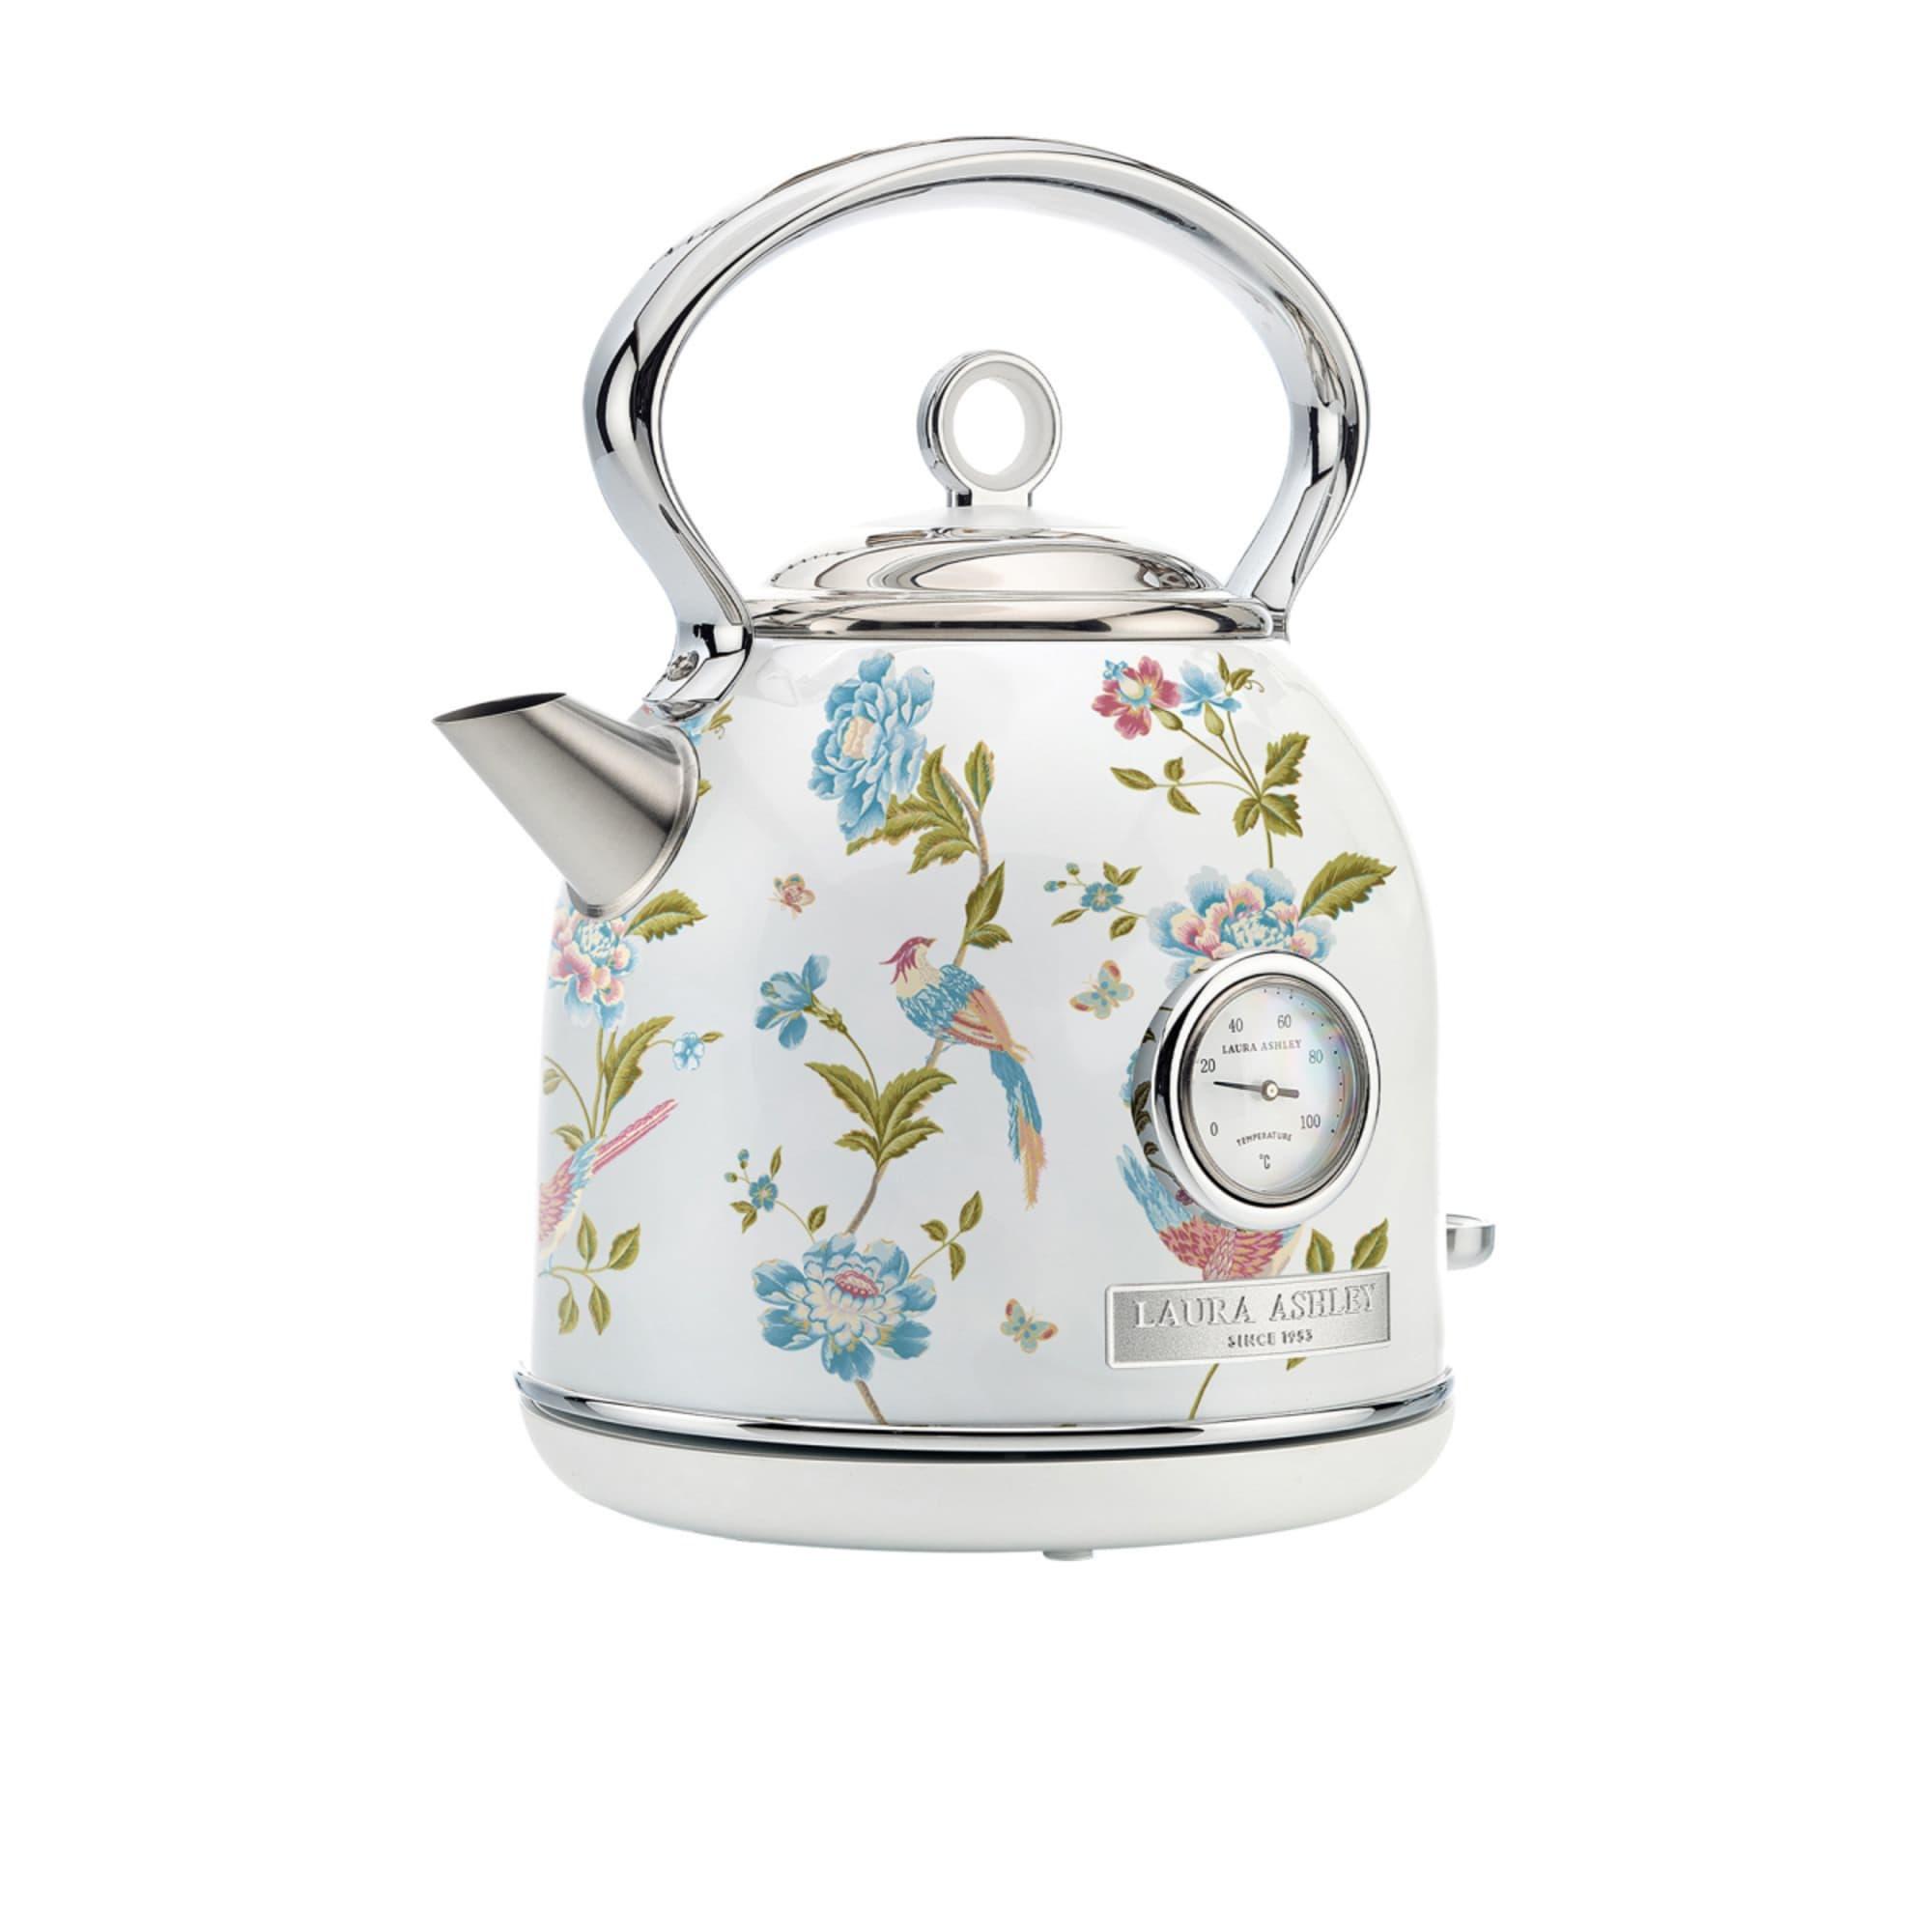 Laura Ashley Elveden Electric Kettle 1.7L White and Silver Image 7